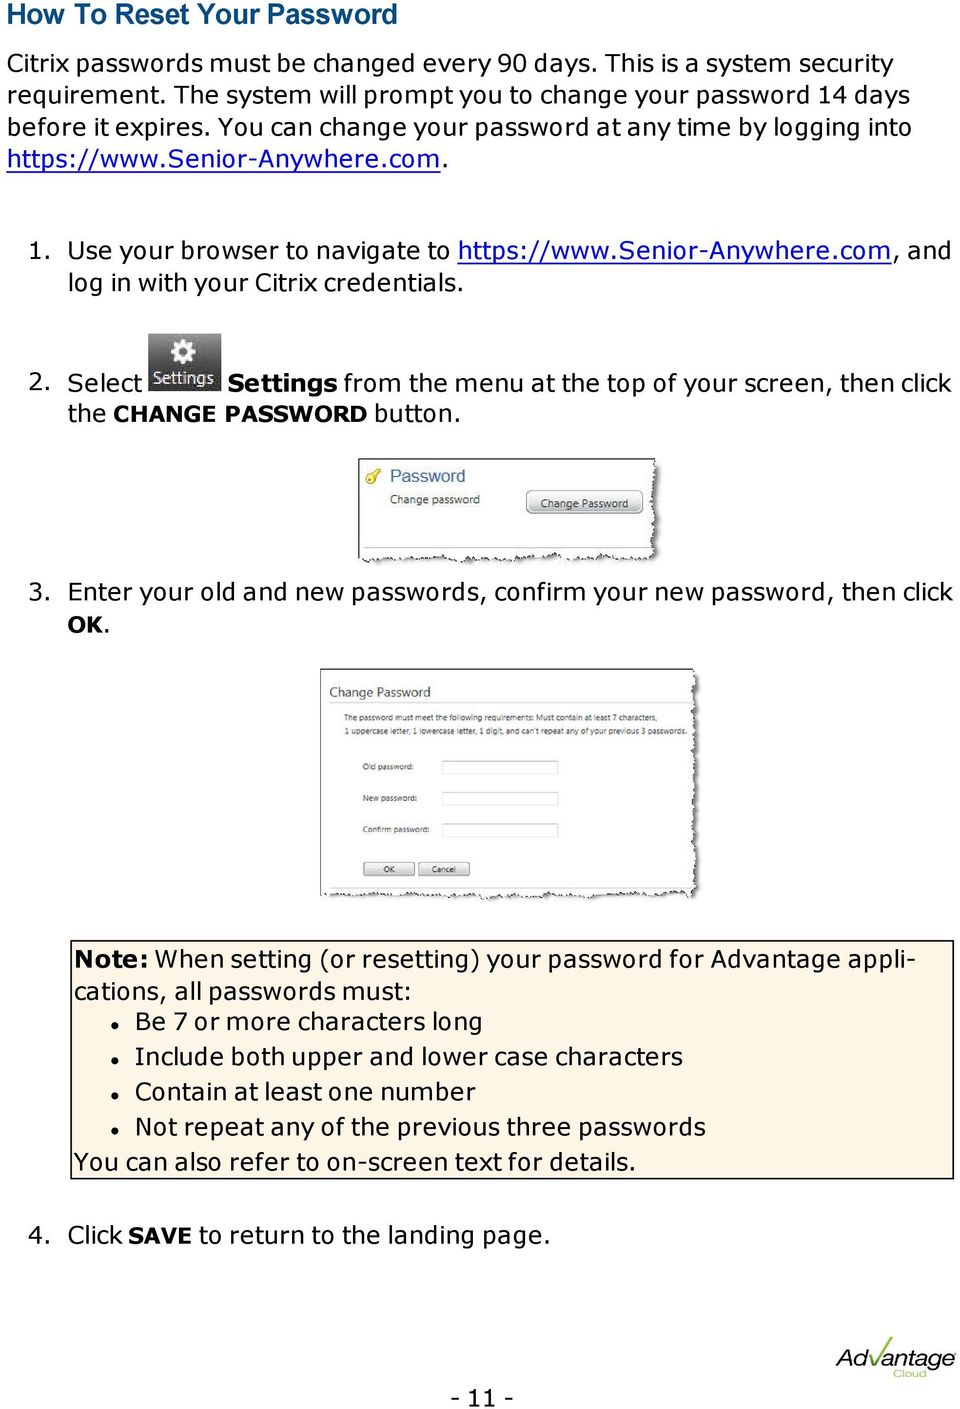 2. Select Settings from the menu at the top of your screen, then click the CHANGE PASSWORD button. 3. Enter your old and new passwords, confirm your new password, then click OK.